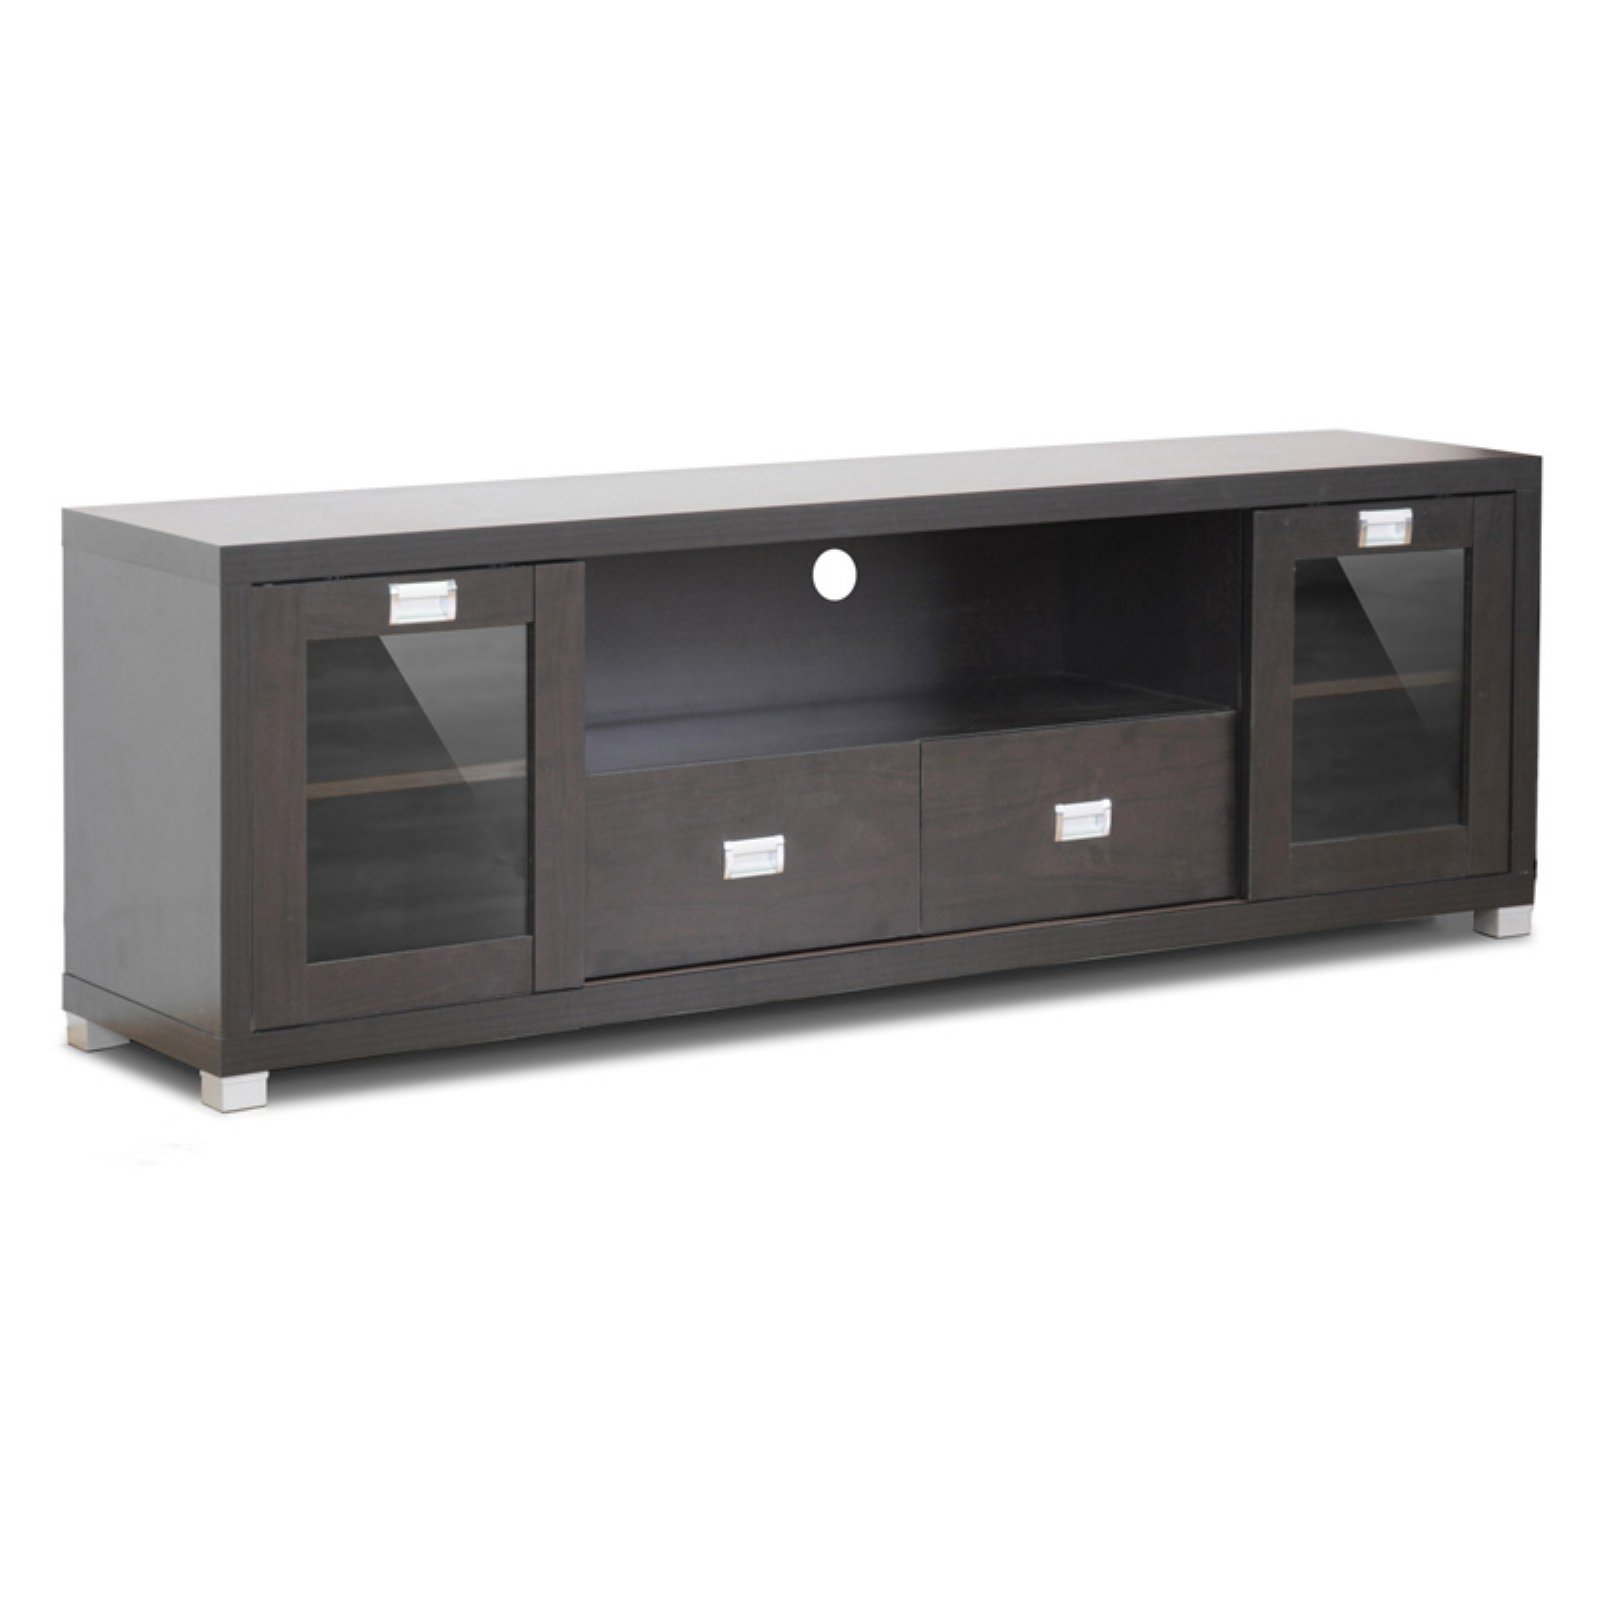 Baxton Studio Gosford TV Stand in Brown - image 3 of 3